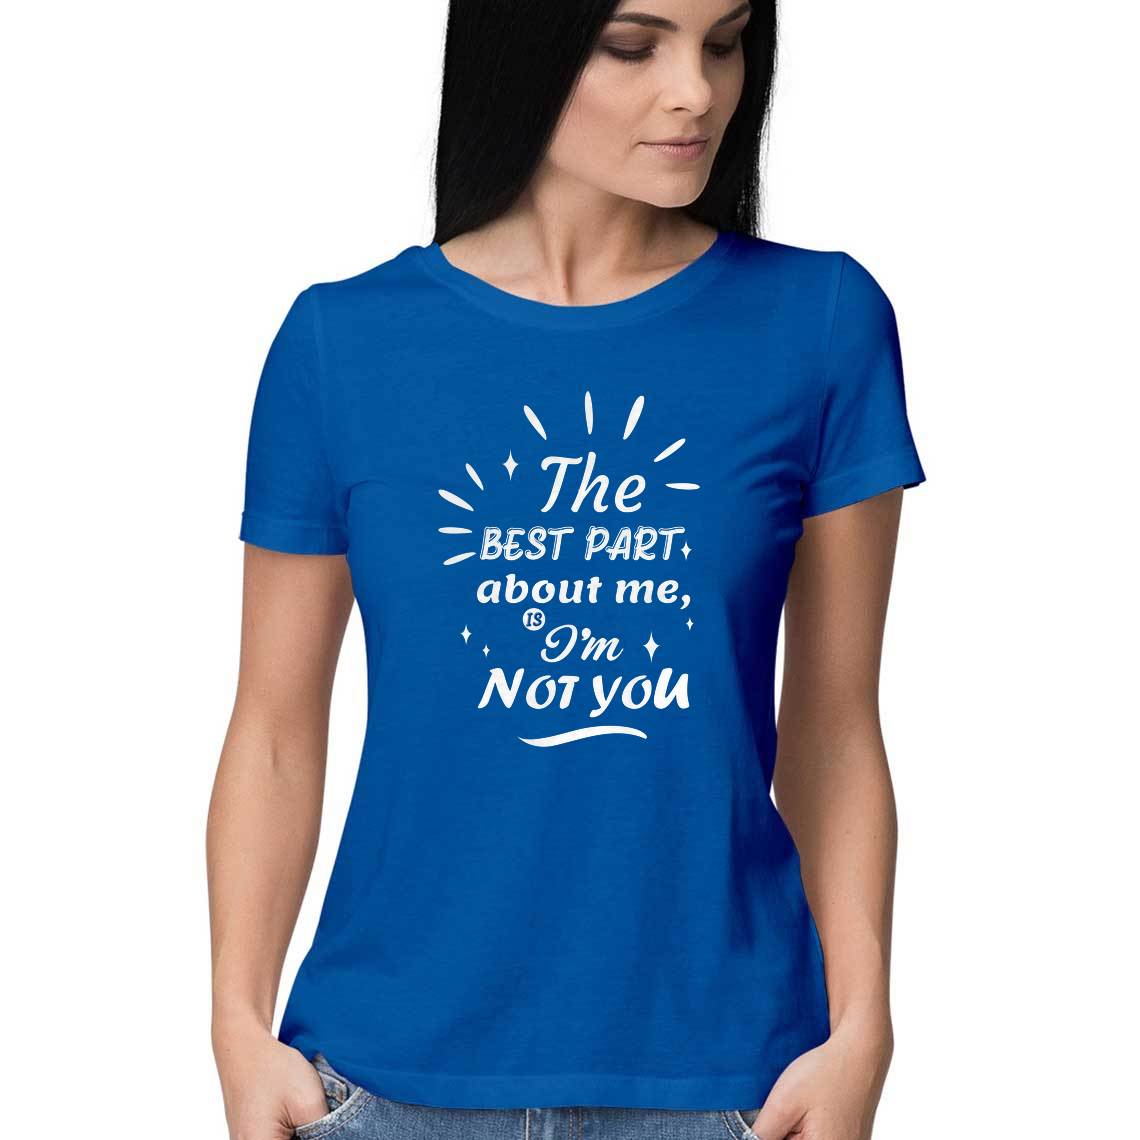 The Best Part About Me Is I'm Not You T-Shirt - 9thson